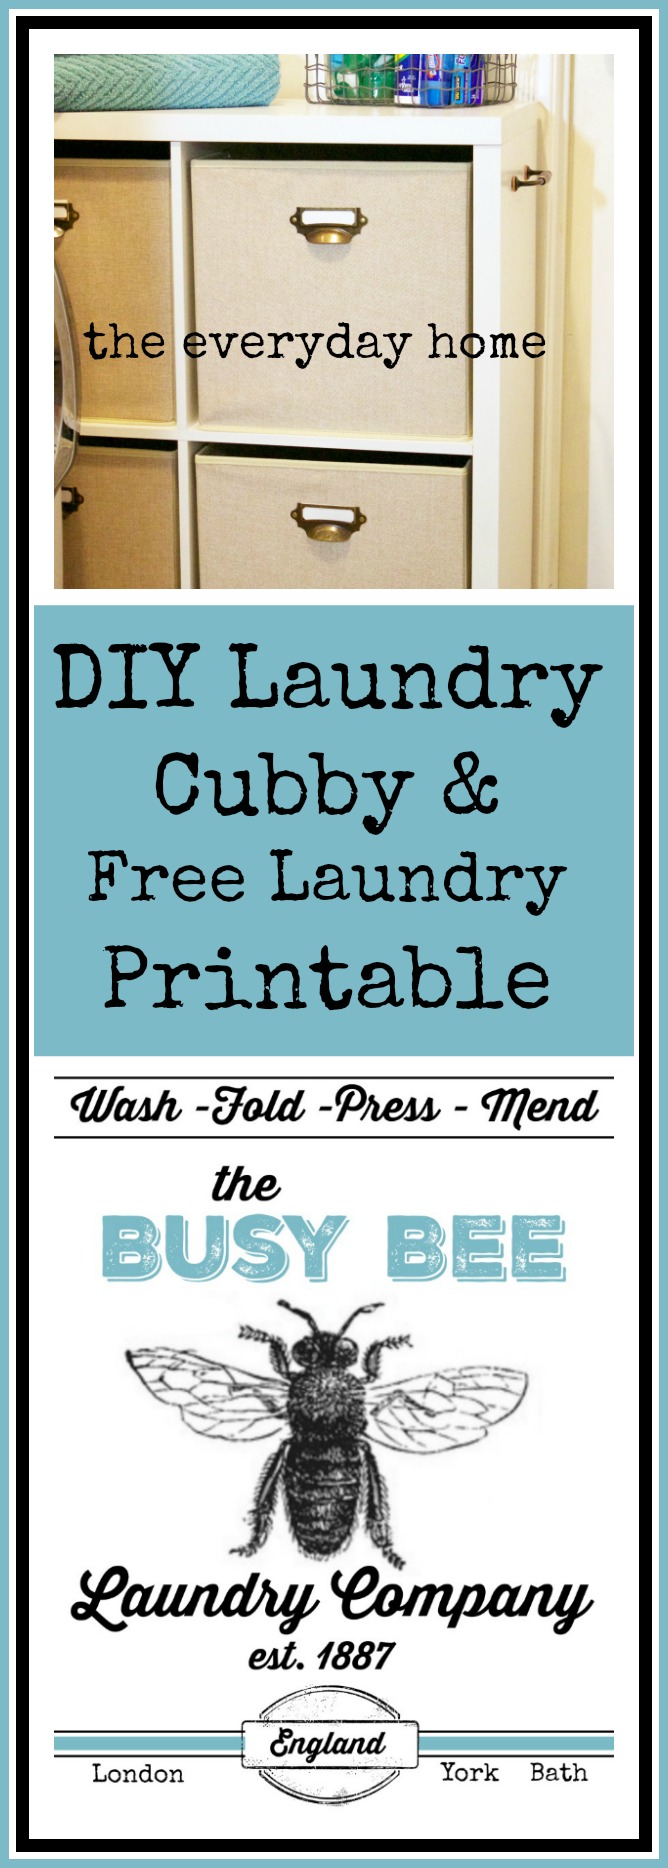 diy-laundry-cubby-on-wheels-and-laundry-printable | The Everyday Home | www.everydayhomeblog.com